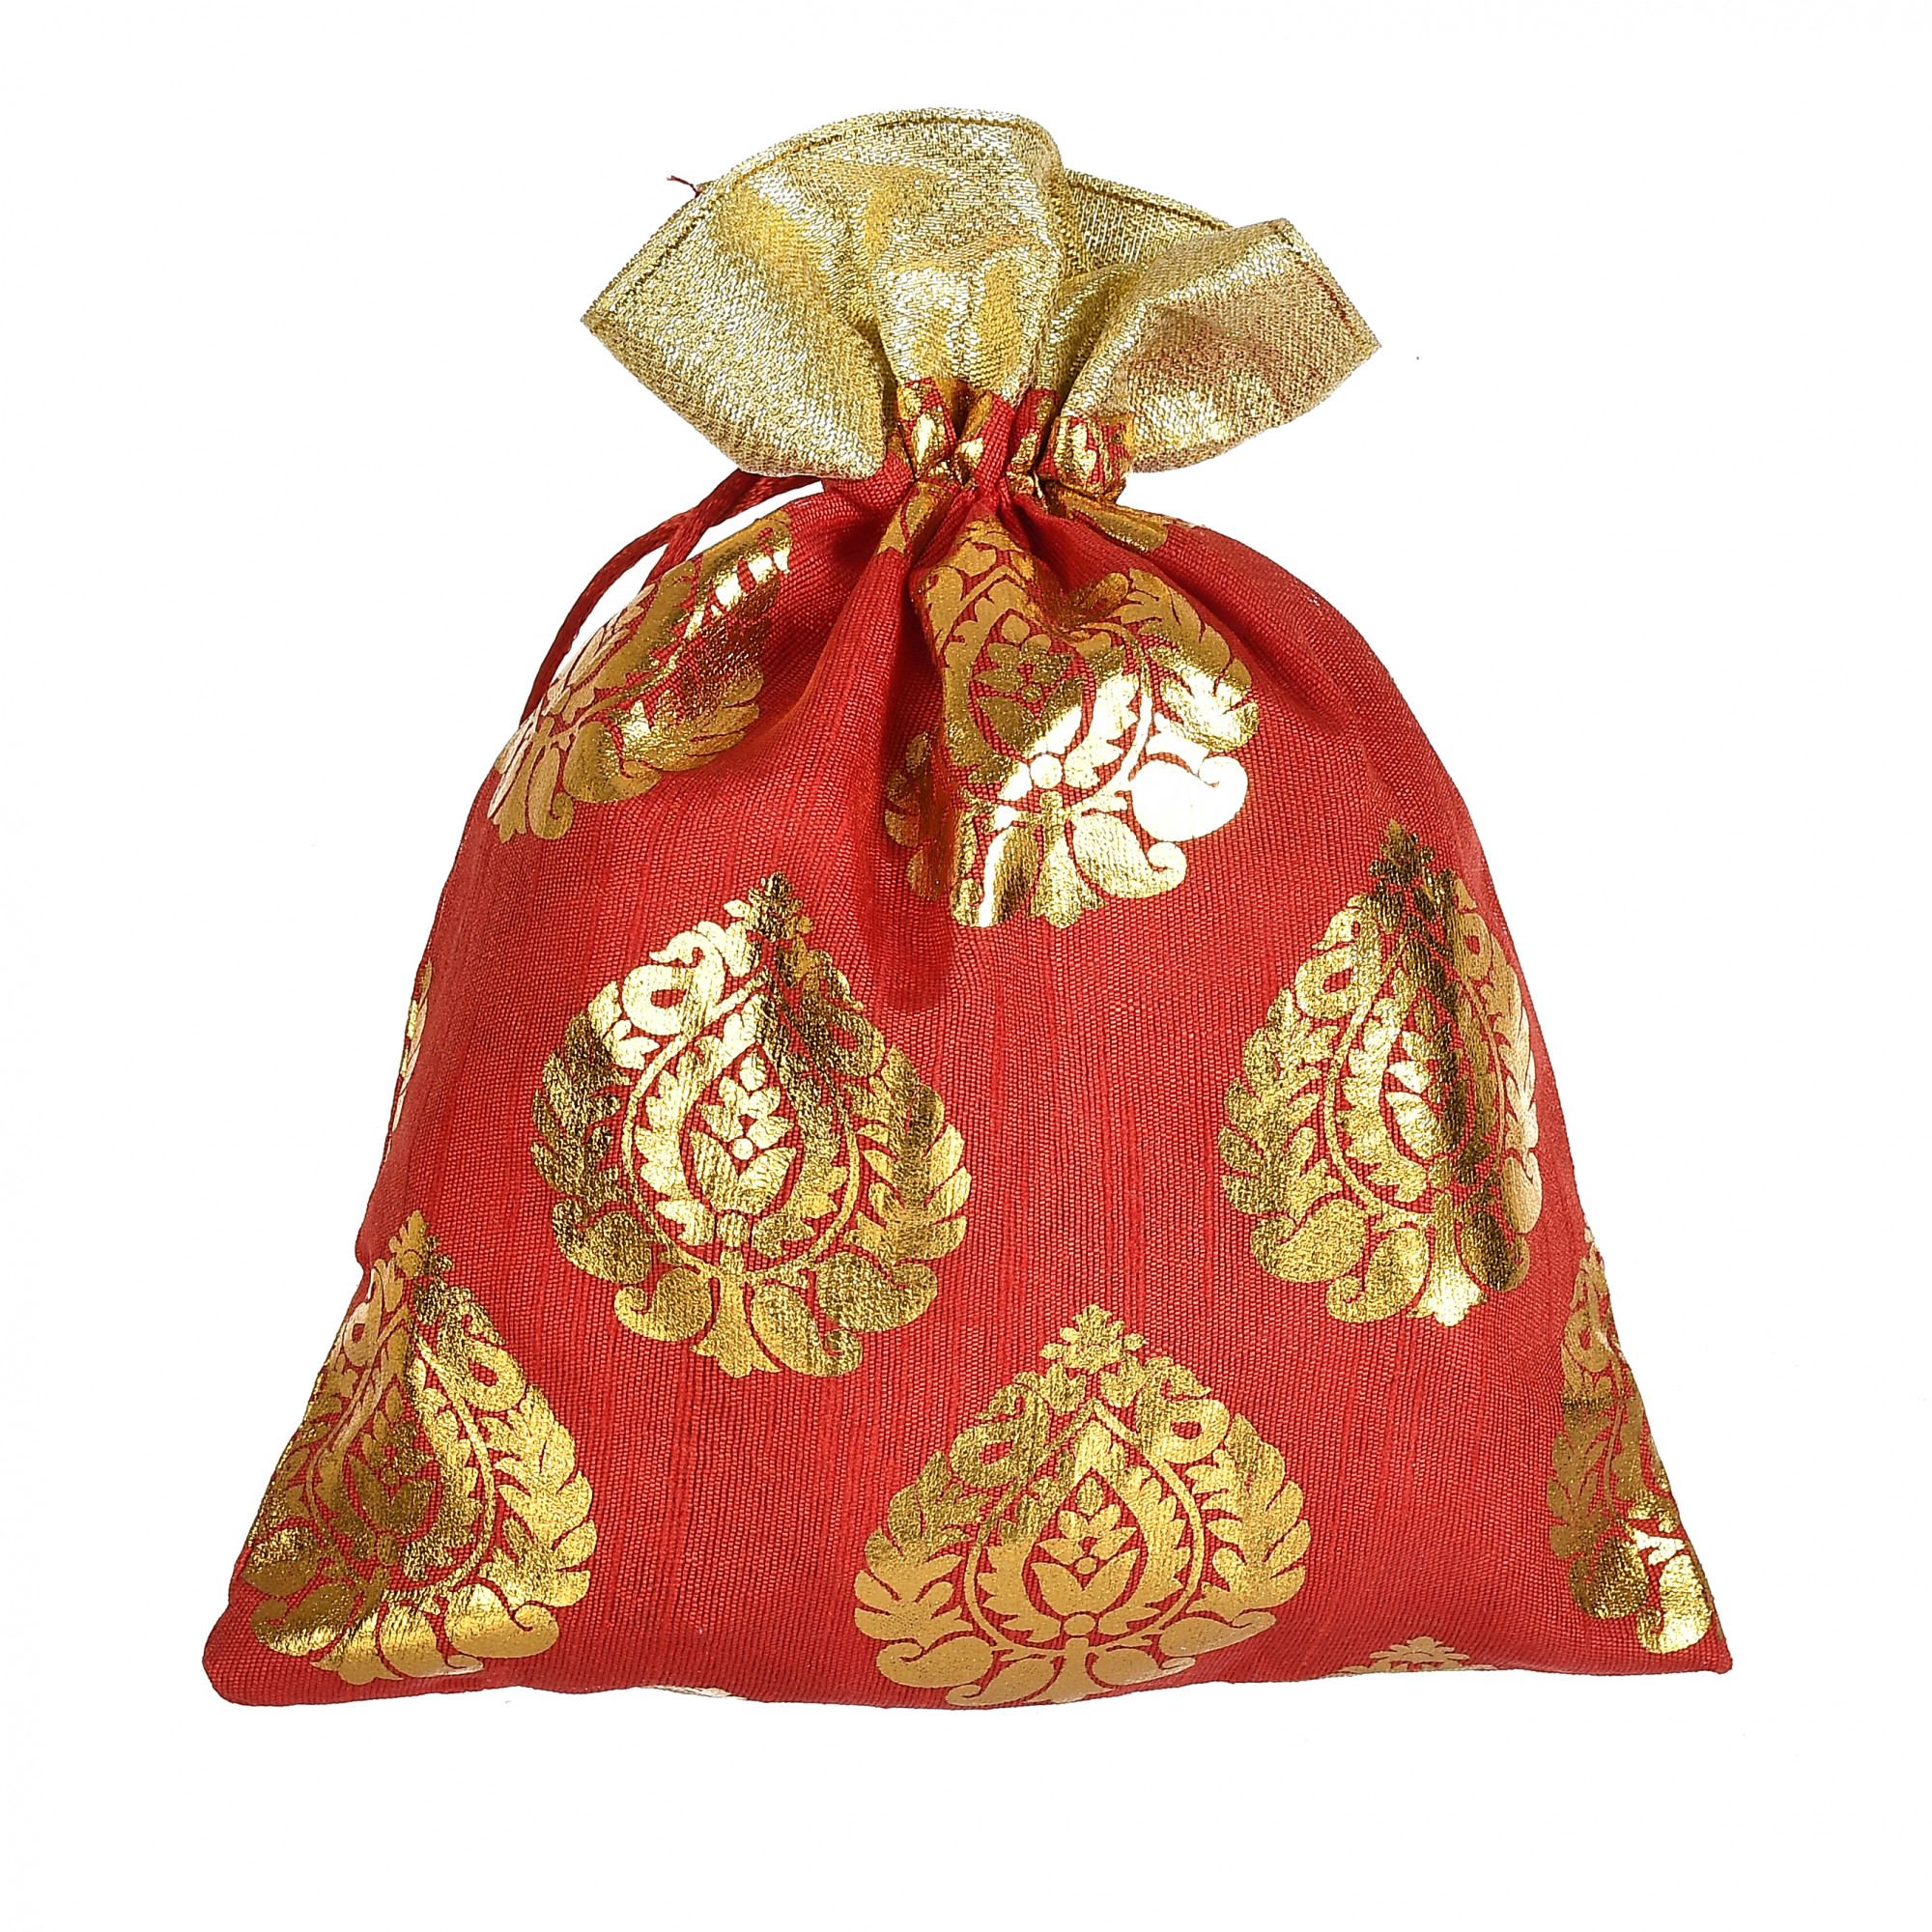 Kuber Industries Leaf Design  Drawstring Potli Bag Party Wedding Favor Gift Jewelry Bags-(Red)